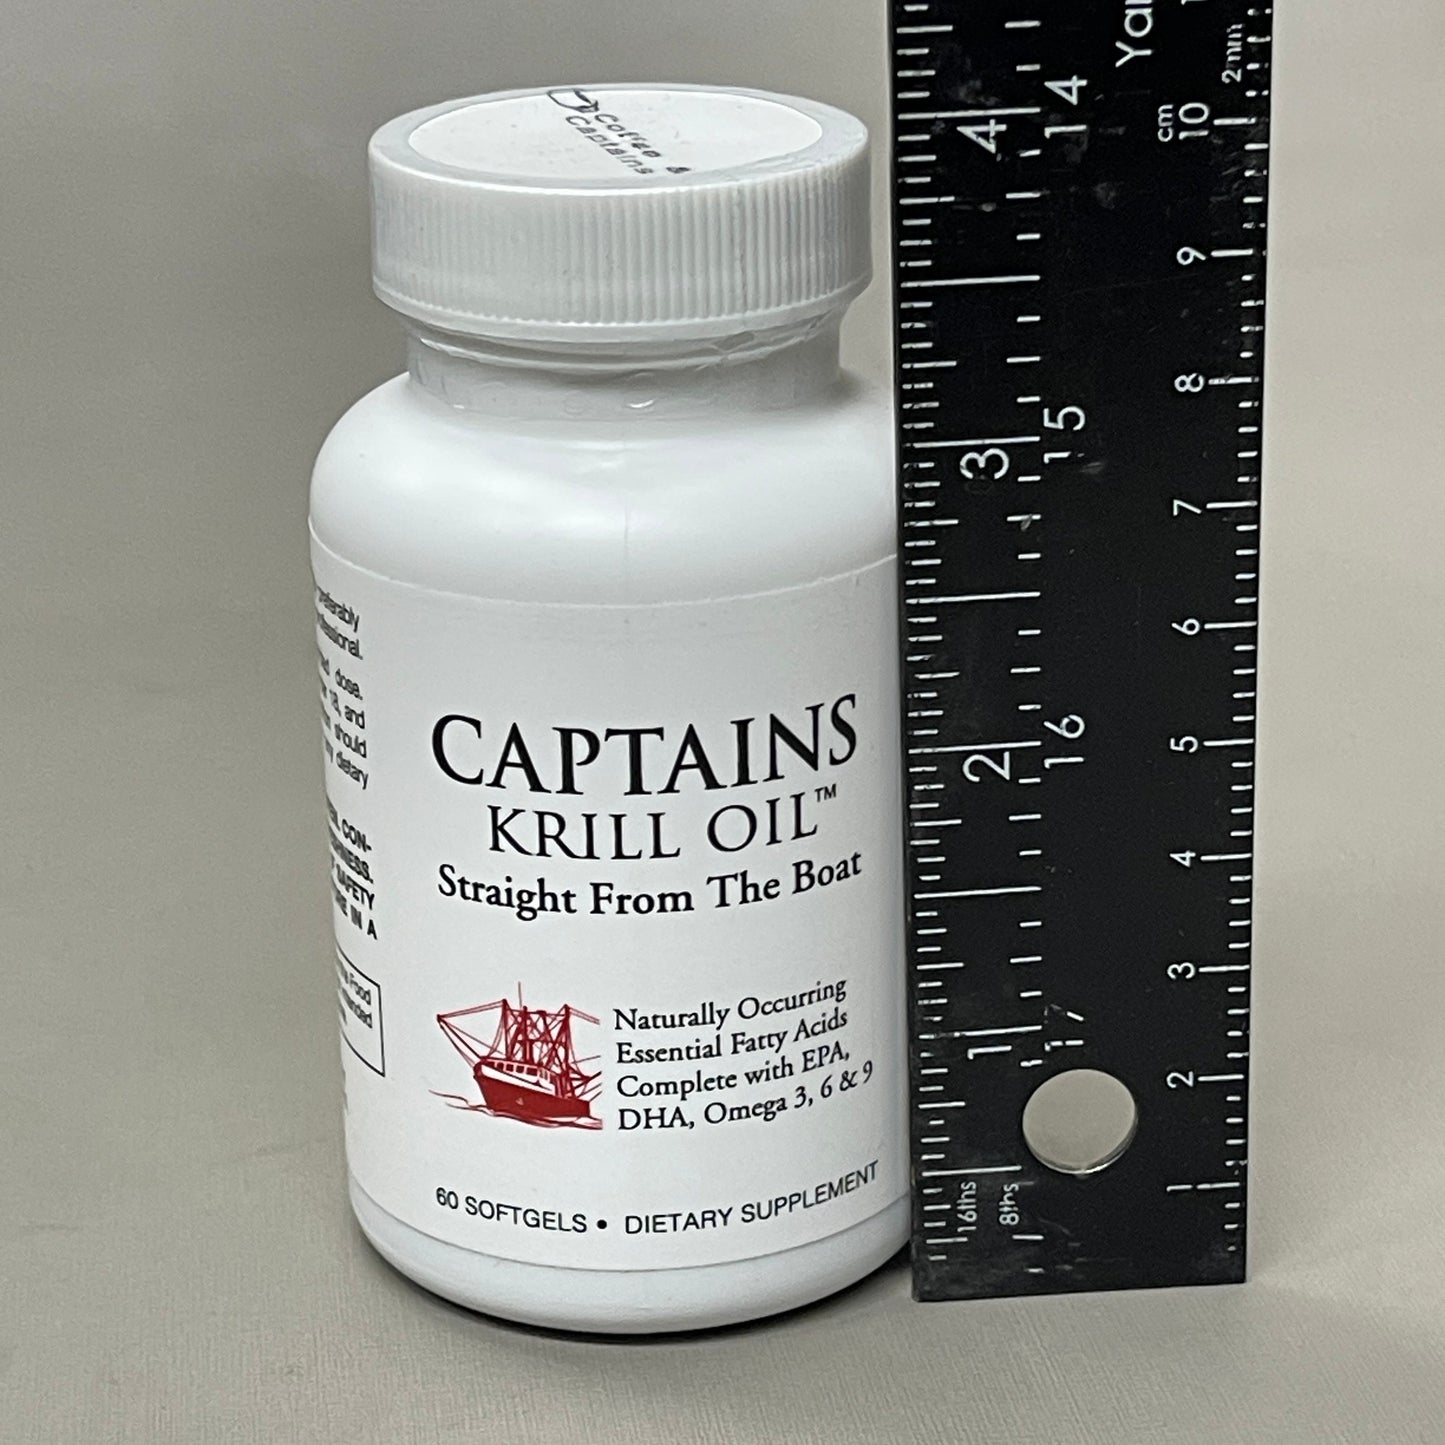 CAPTAIN KRILLS Krill Oil Dietary Supplement Omega 3, 6, 9 -2 (60 count) Total 120 Softgels BB 11/23 (New)